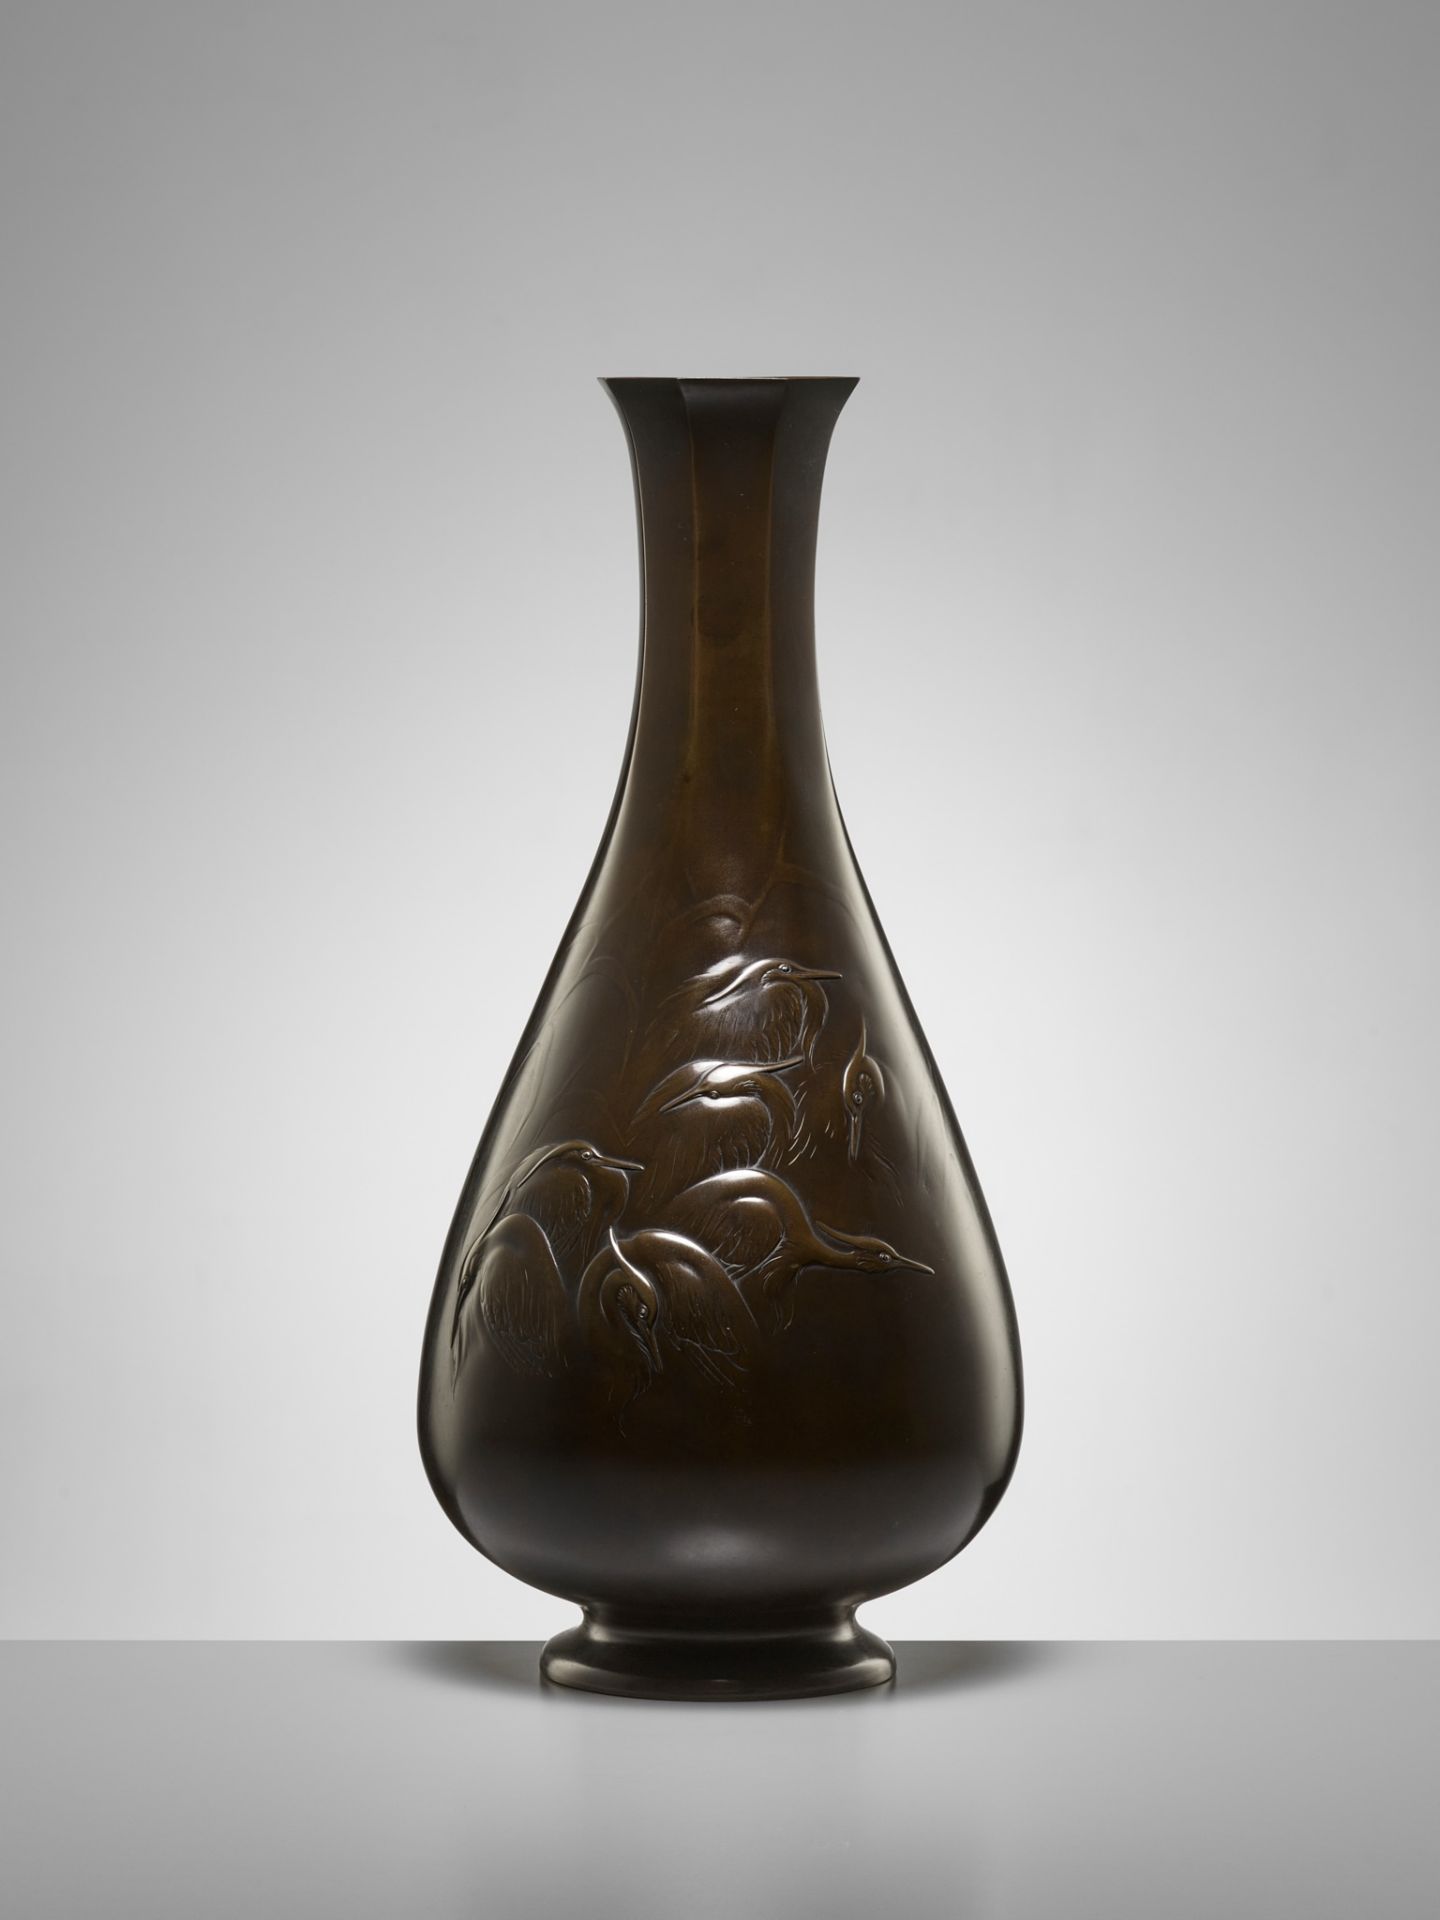 HIDEMITSU: A SUPERB AND LARGE BRONZE VASE DEPICTING HERONS AND LOTUS - Image 2 of 10